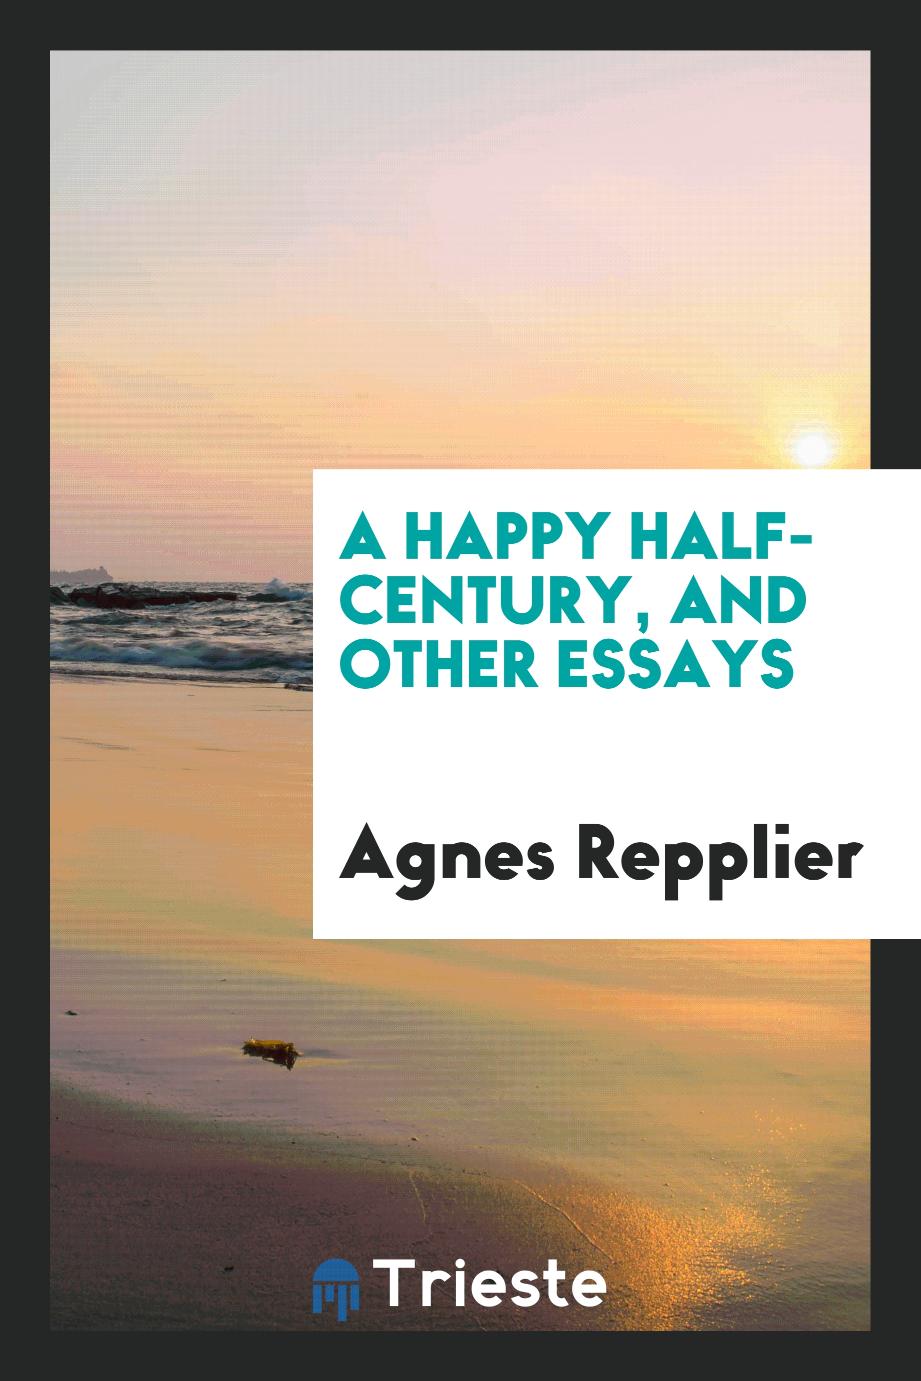 A happy half-century, and other essays